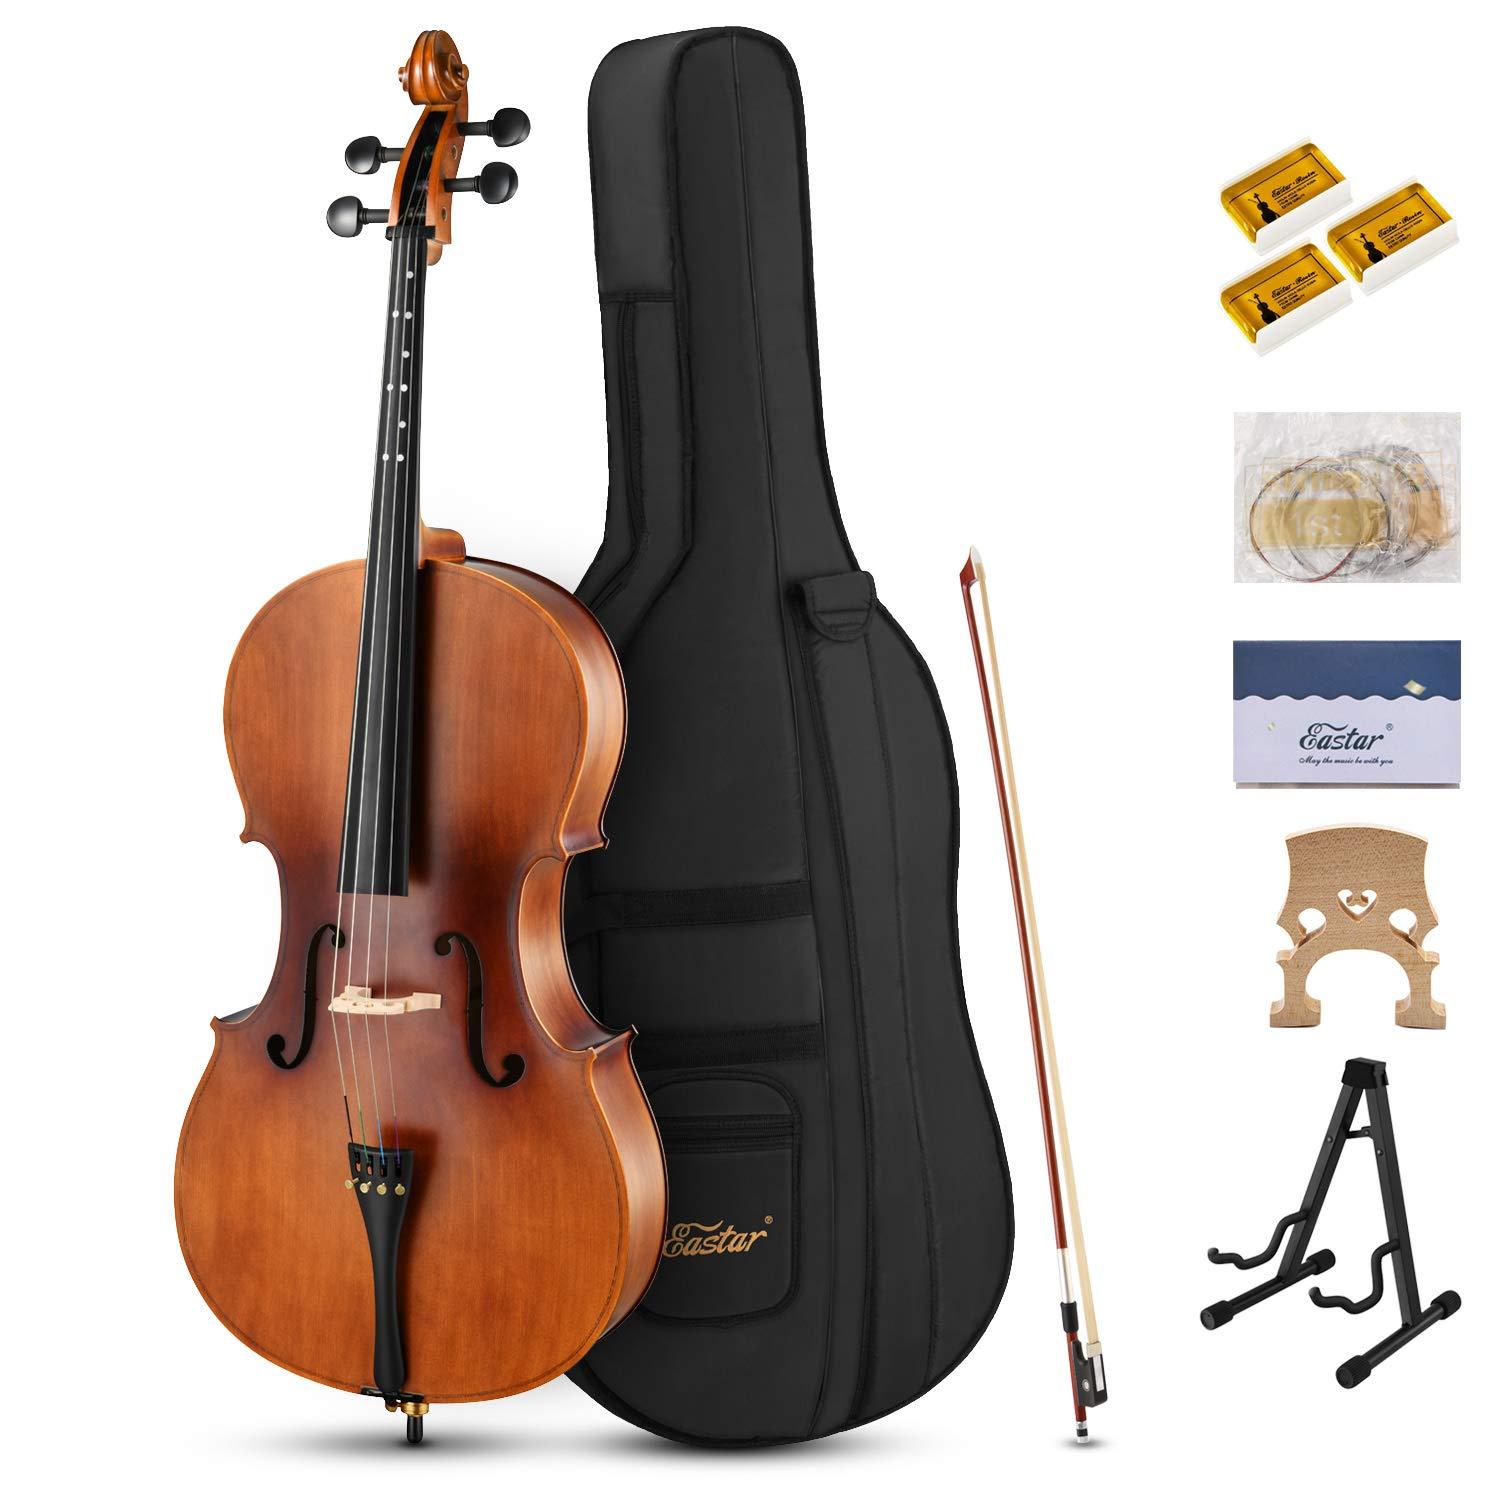 

Eastar EVC-1 4/4 Acoustic Cello Matt Natural Varnish for Beginners with Cello Stand, Case, Bow, Bridge, Rosin, Extra Set of Strings